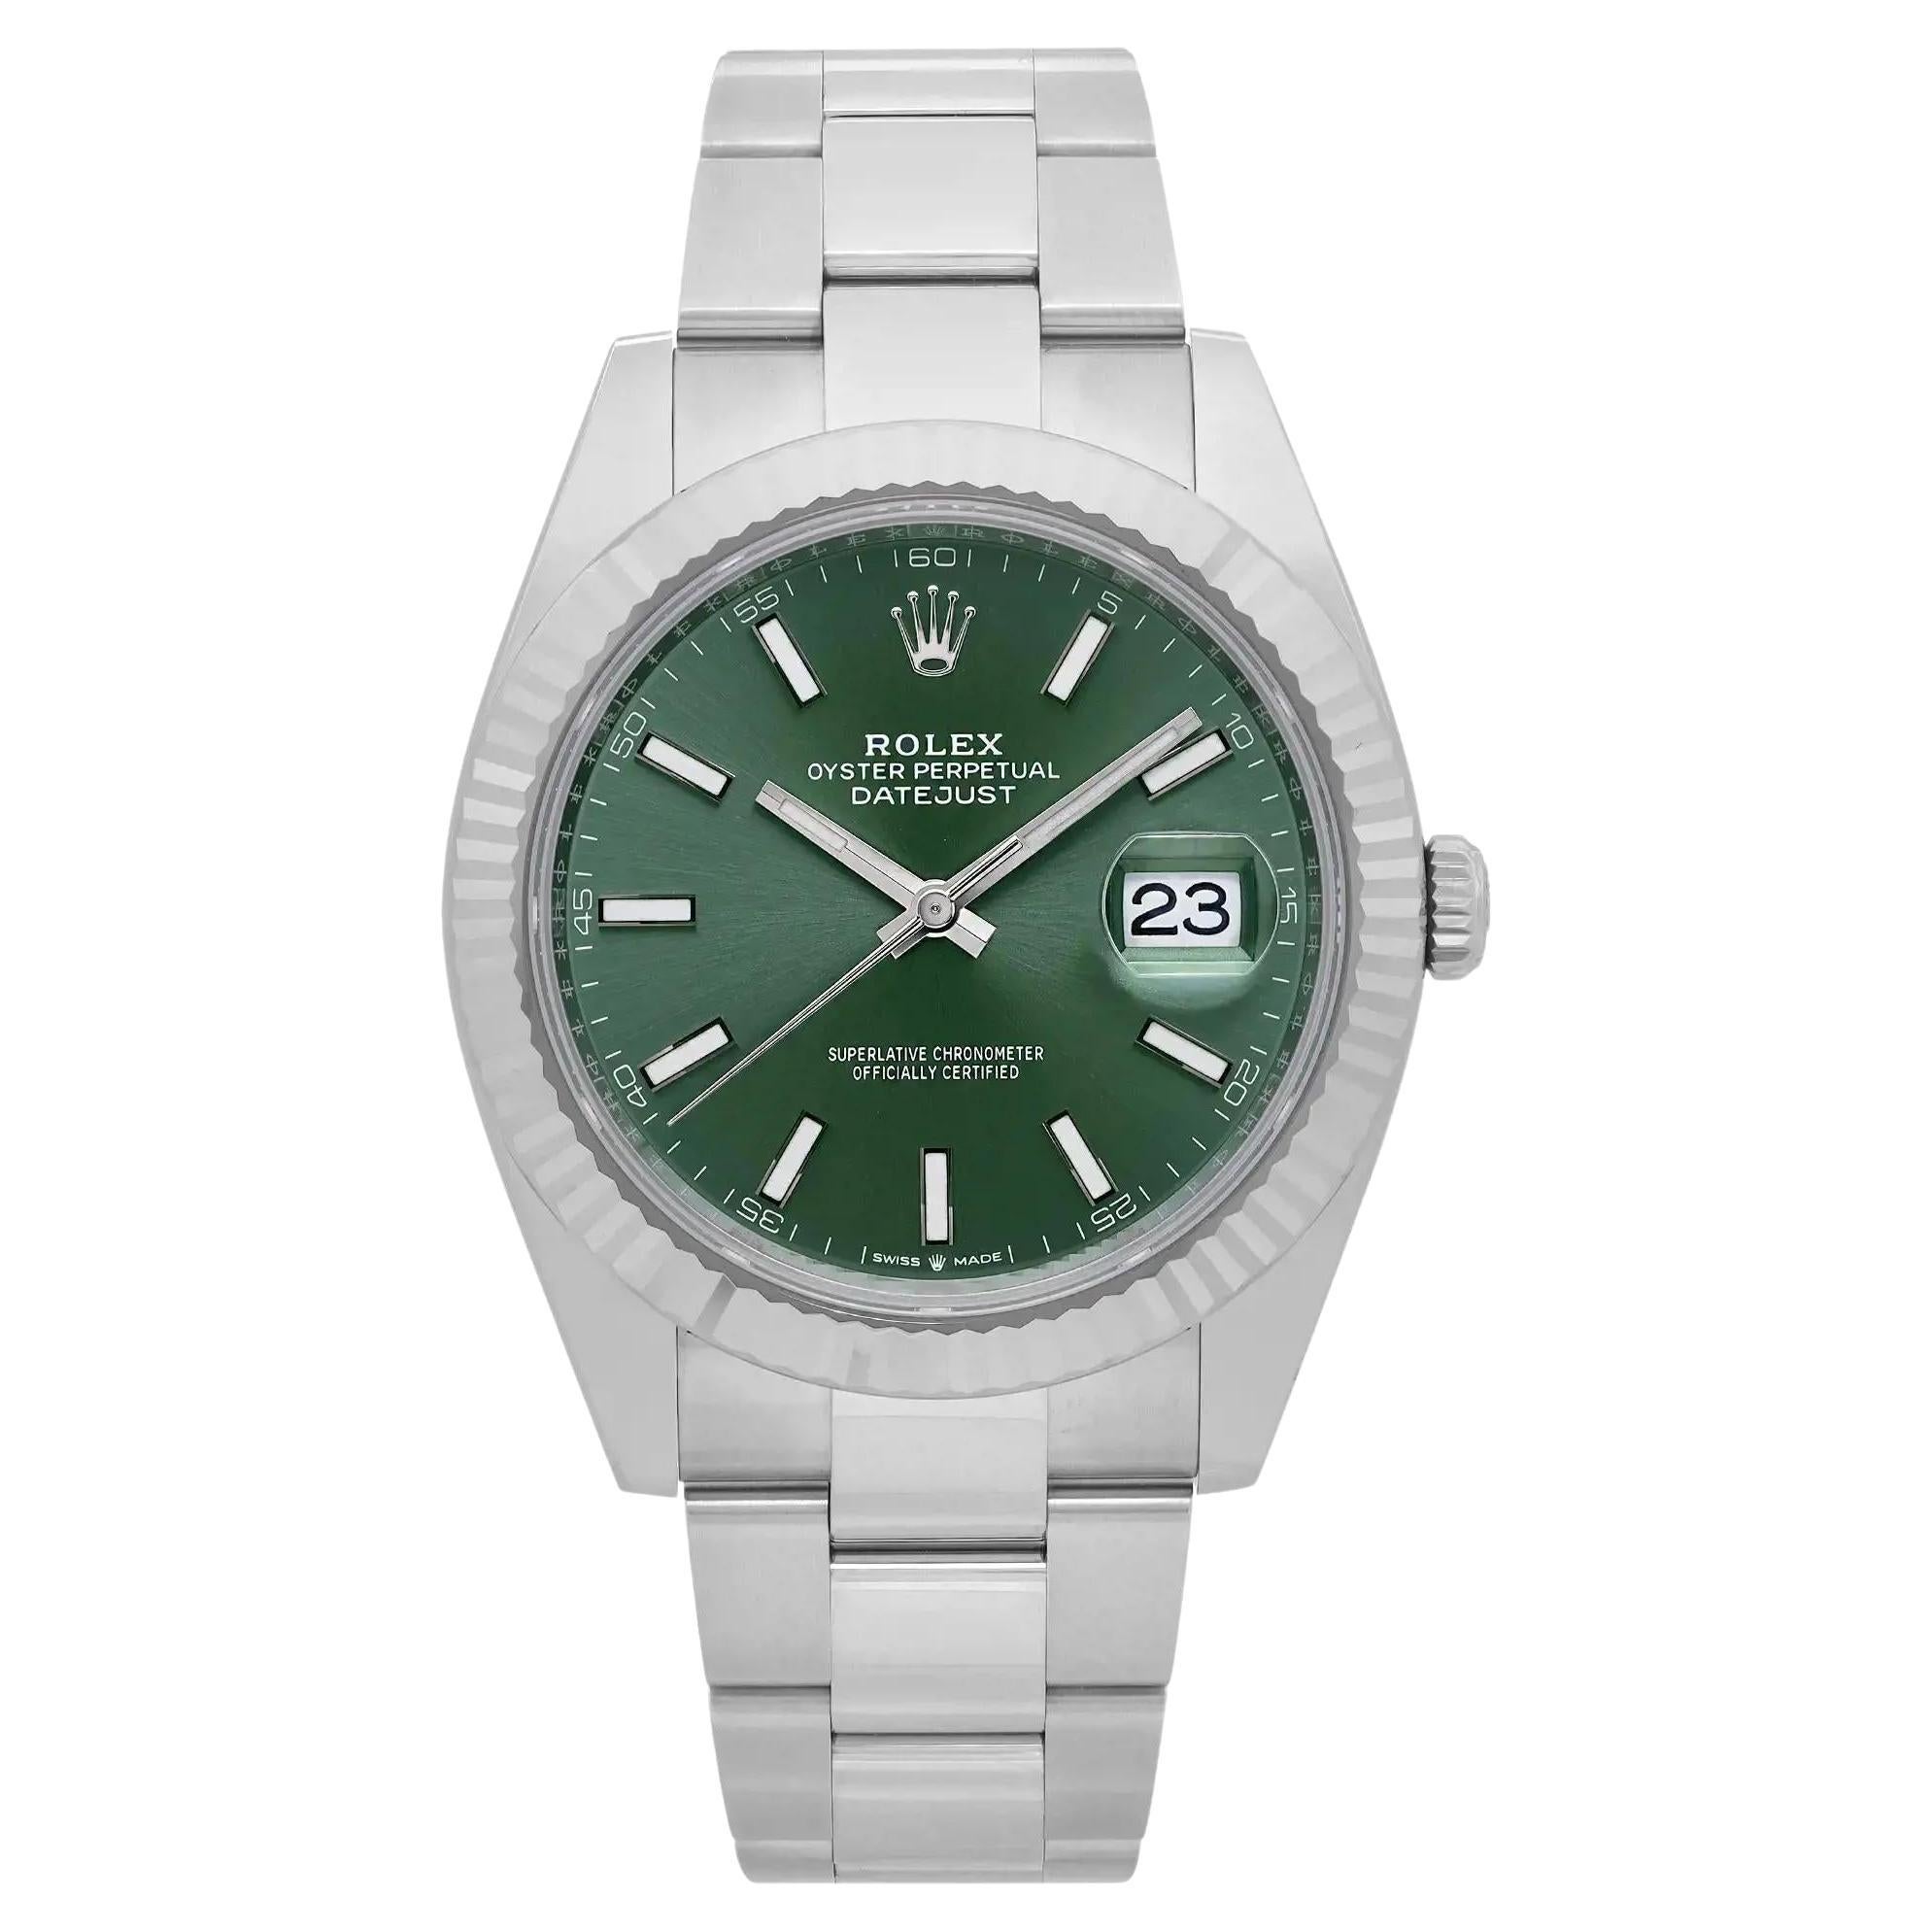 Rolex Datejust Mint Green New Release Steel White Gold Automatic Watch 126334 For Sale